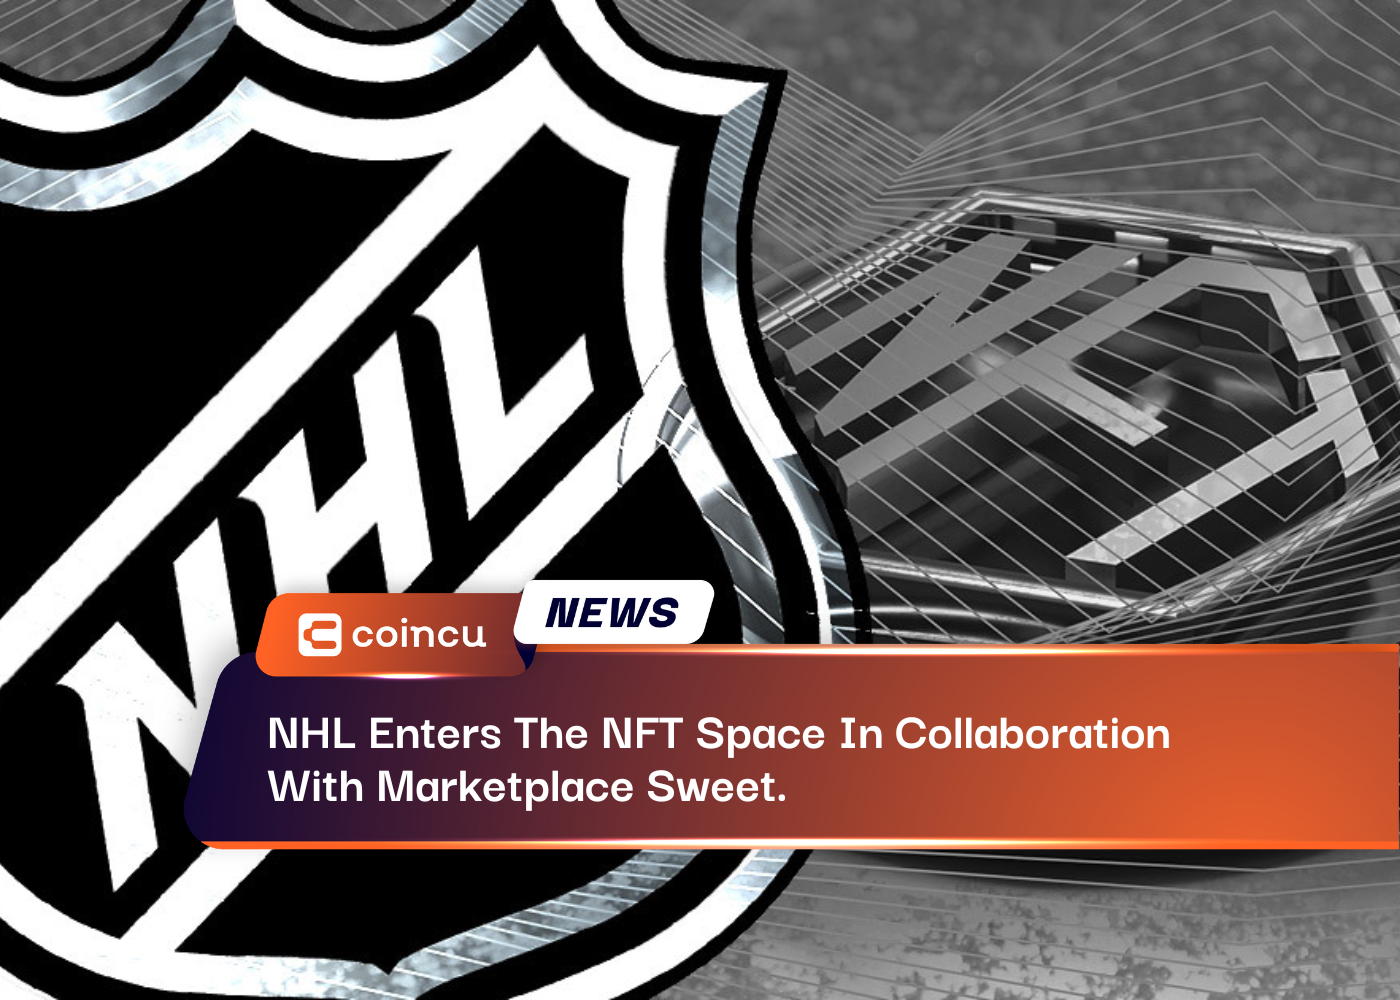 NHL Enters The NFT Space In Collaboration With Marketplace Sweet.